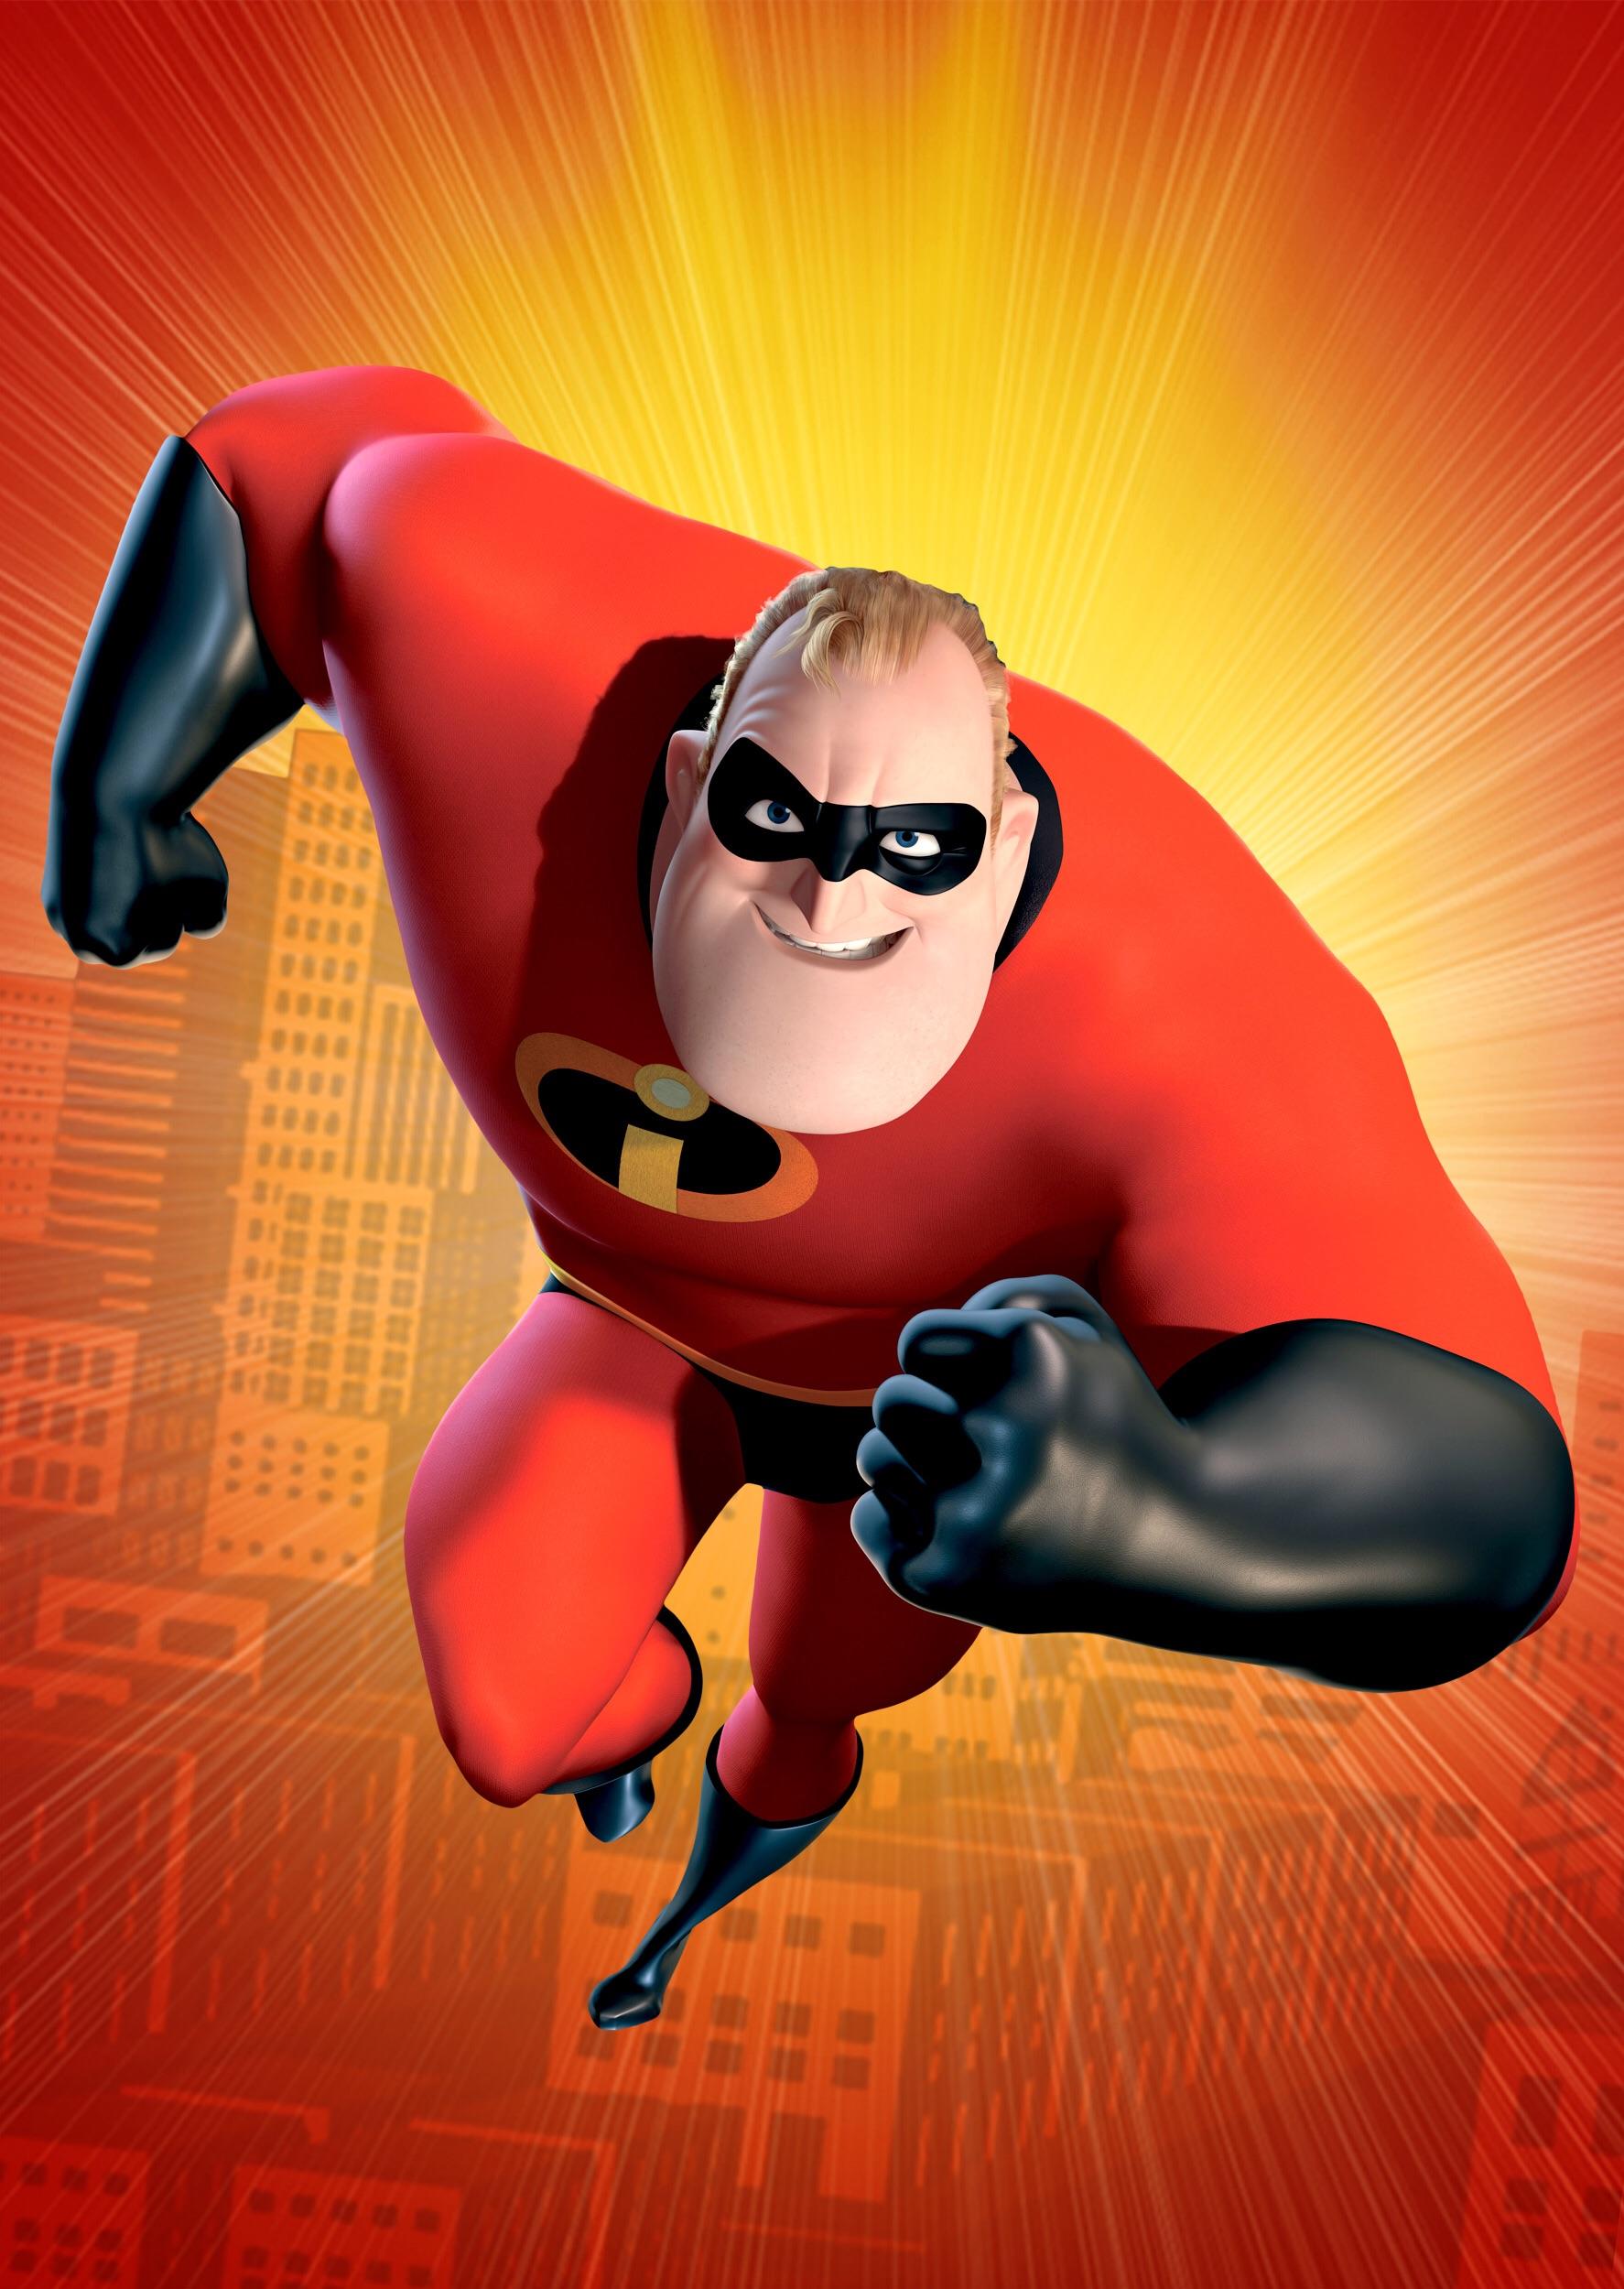 Here is a picture of mr incredible in case anyone wants it for a meme or wallpaper or something